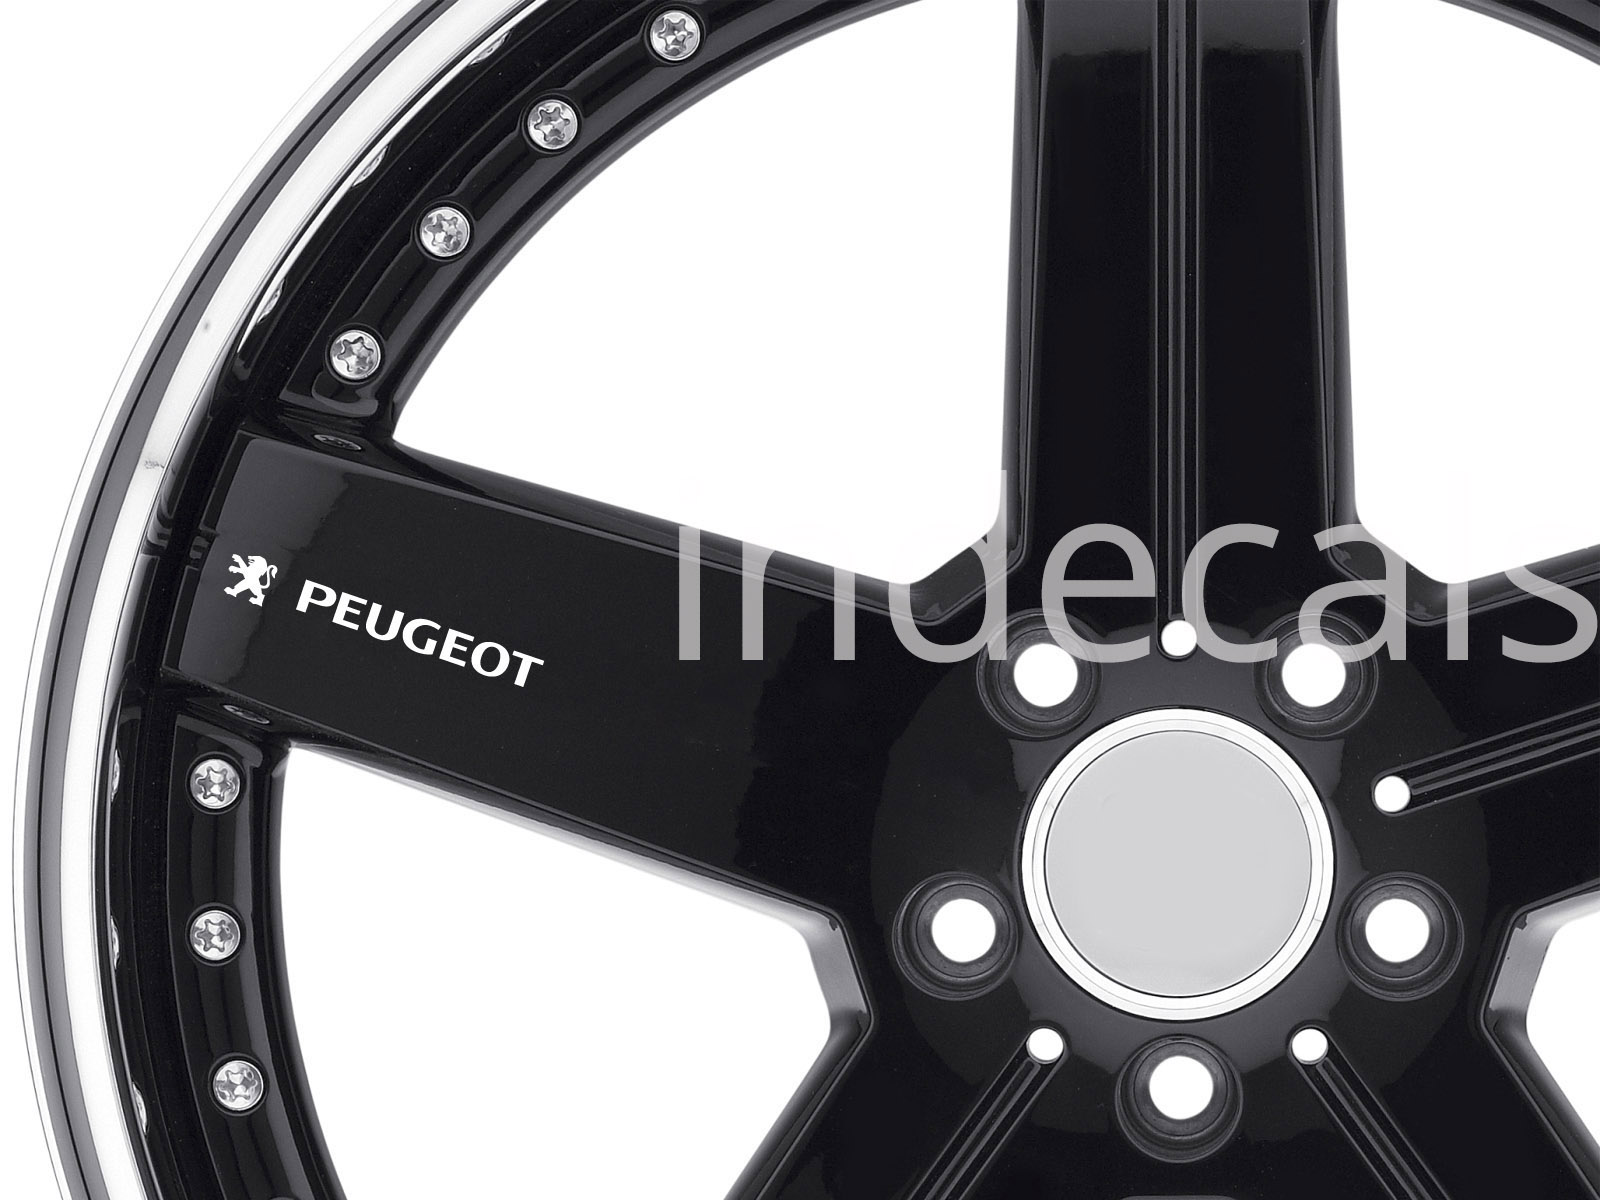 6 x Peugeot Stickers for Wheels - White